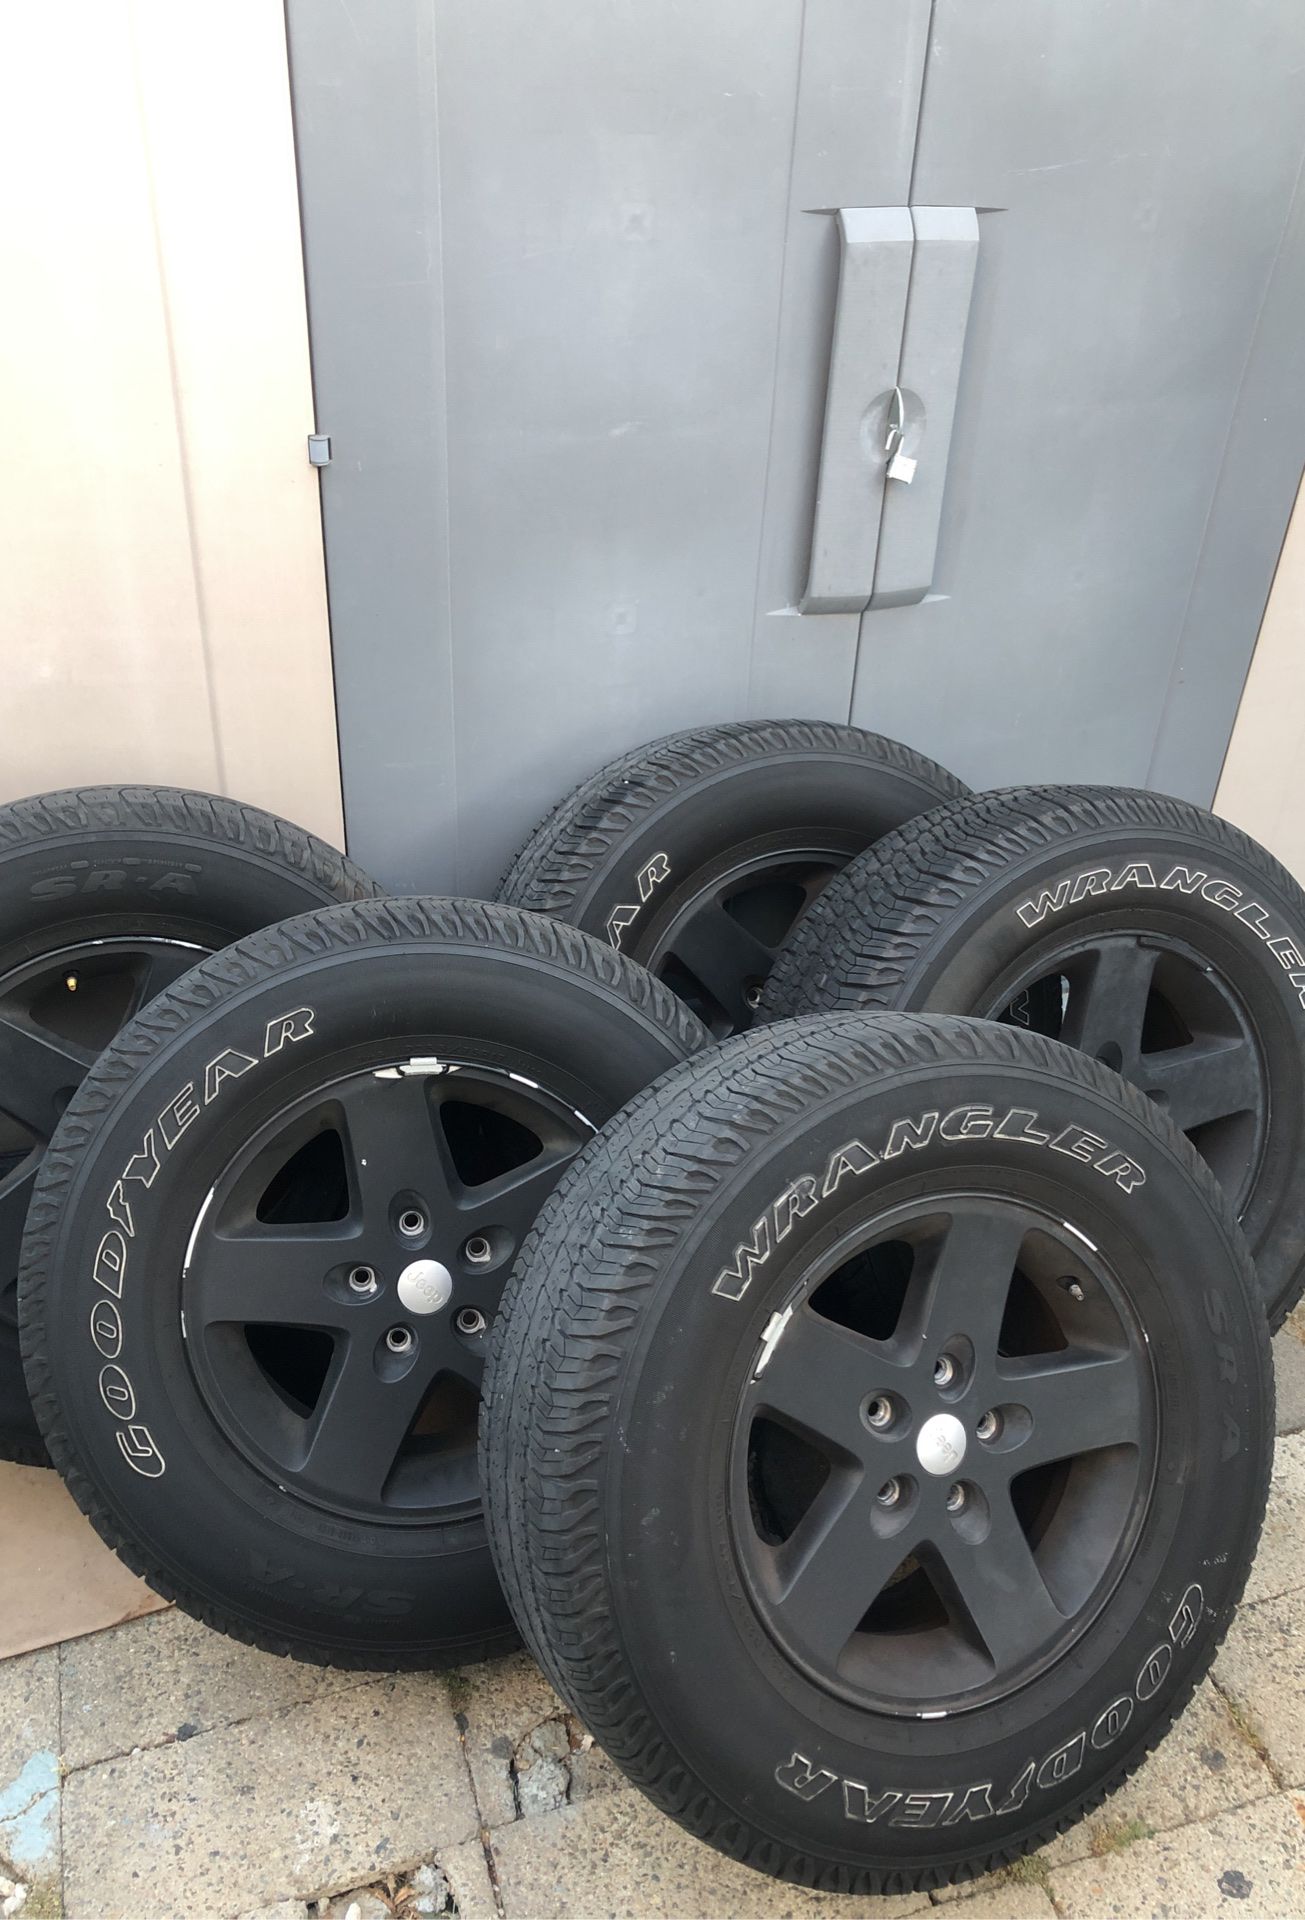 Jeep Wrangler Goodyear 5 tires/rims used and 1 new tire